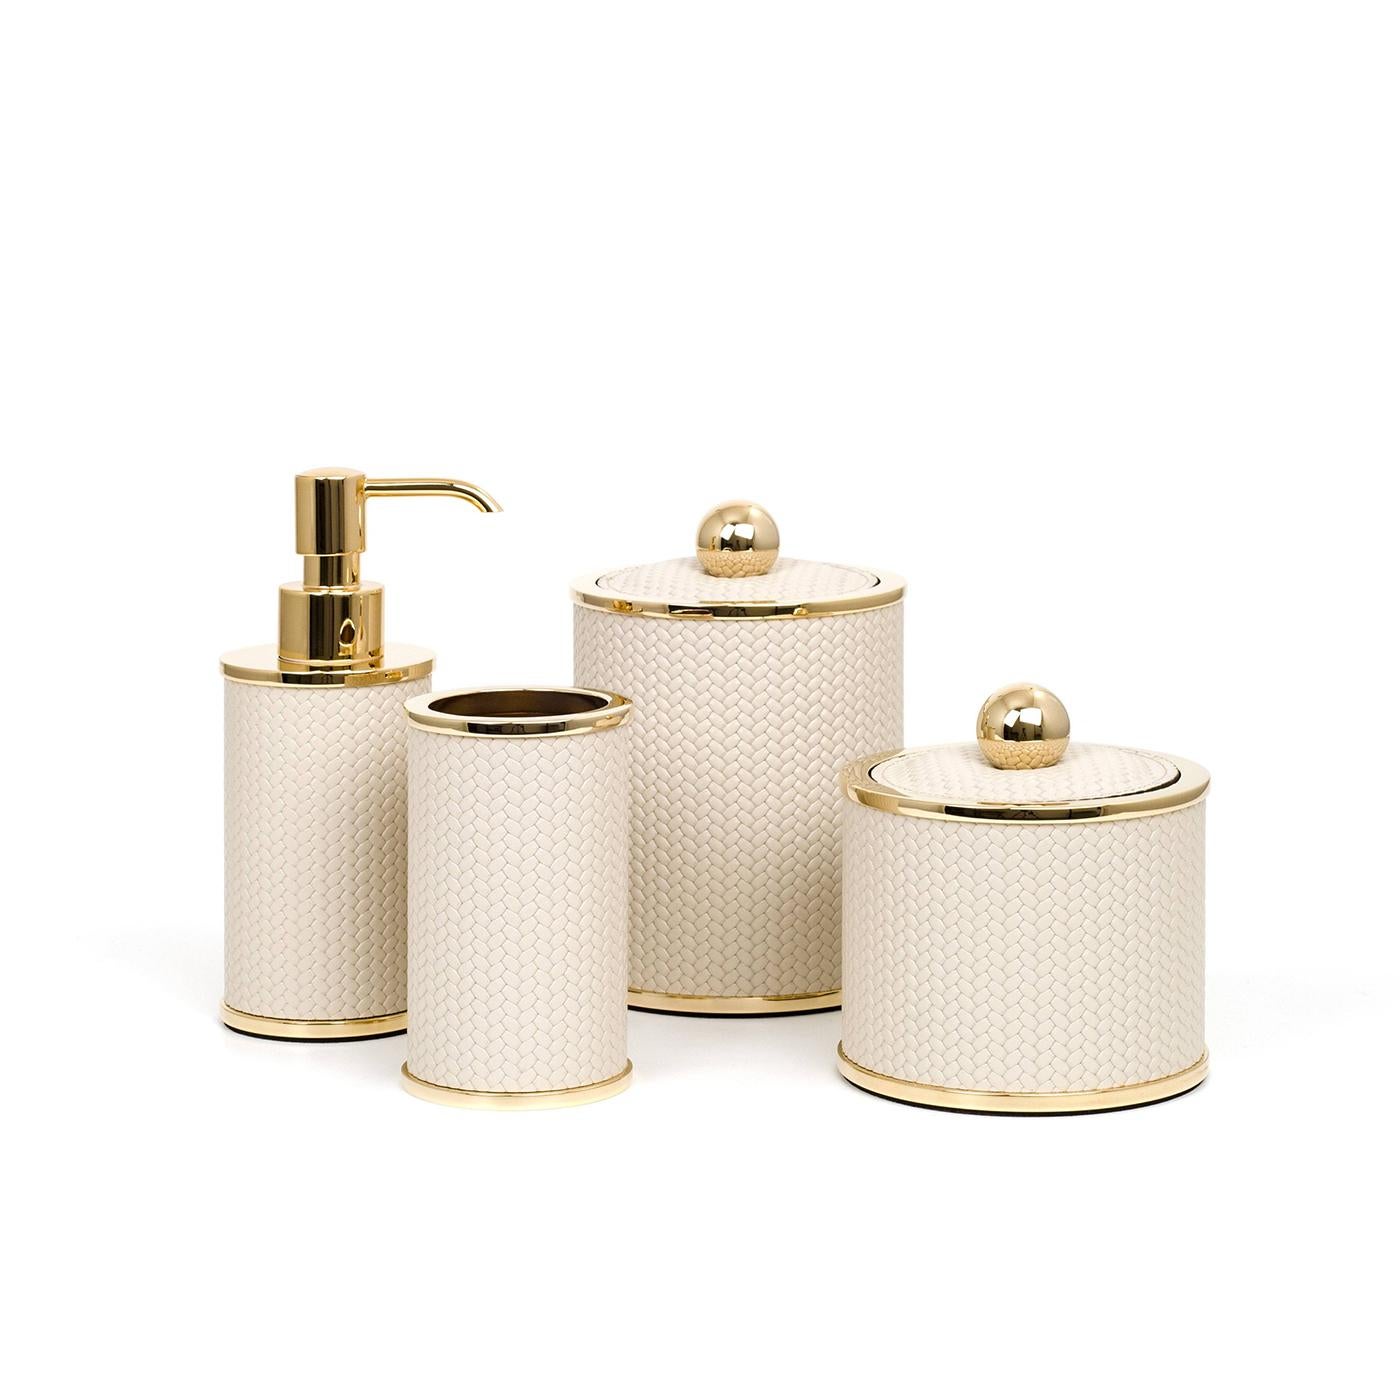 Crafted of brass and enriched with a polished golden finish of timeless refinement, this bathroom set is comprised of a toothbrush holder, soap dispenser, and box for cotton pads equipped with a lid, all placed on a coordinated tray. A prized